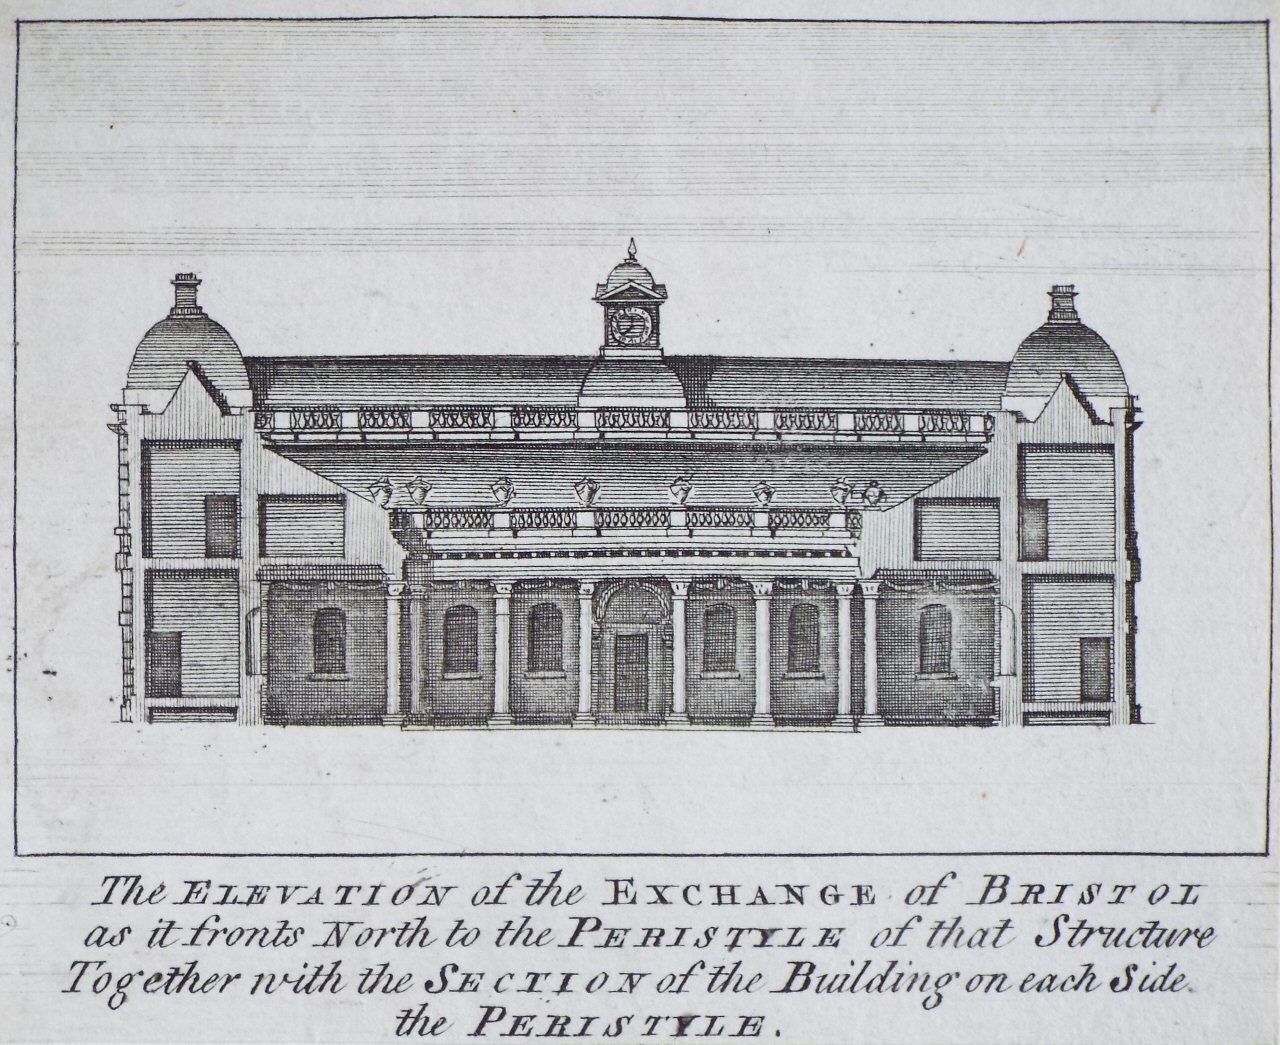 Print - The Elevation of the Exchange of Bristol as it fronts Nouth to the Perisytyle of that Structure Together with the Section of the Building on each Side of the Peristyle.